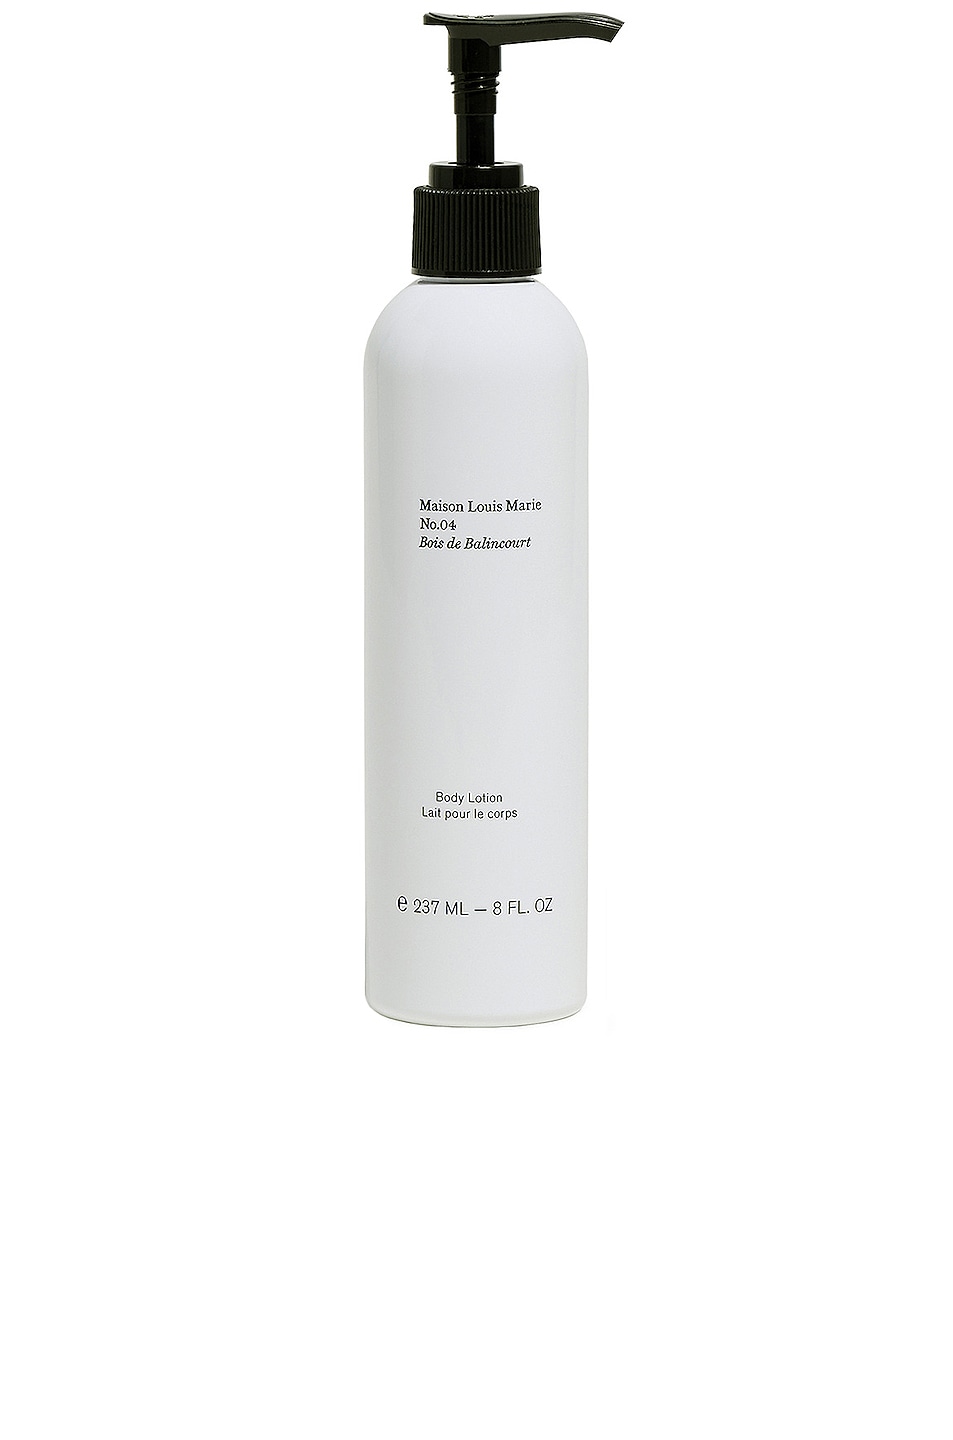 No.04 Bois de Balincourt Body and Hand Lotion in Beauty: NA